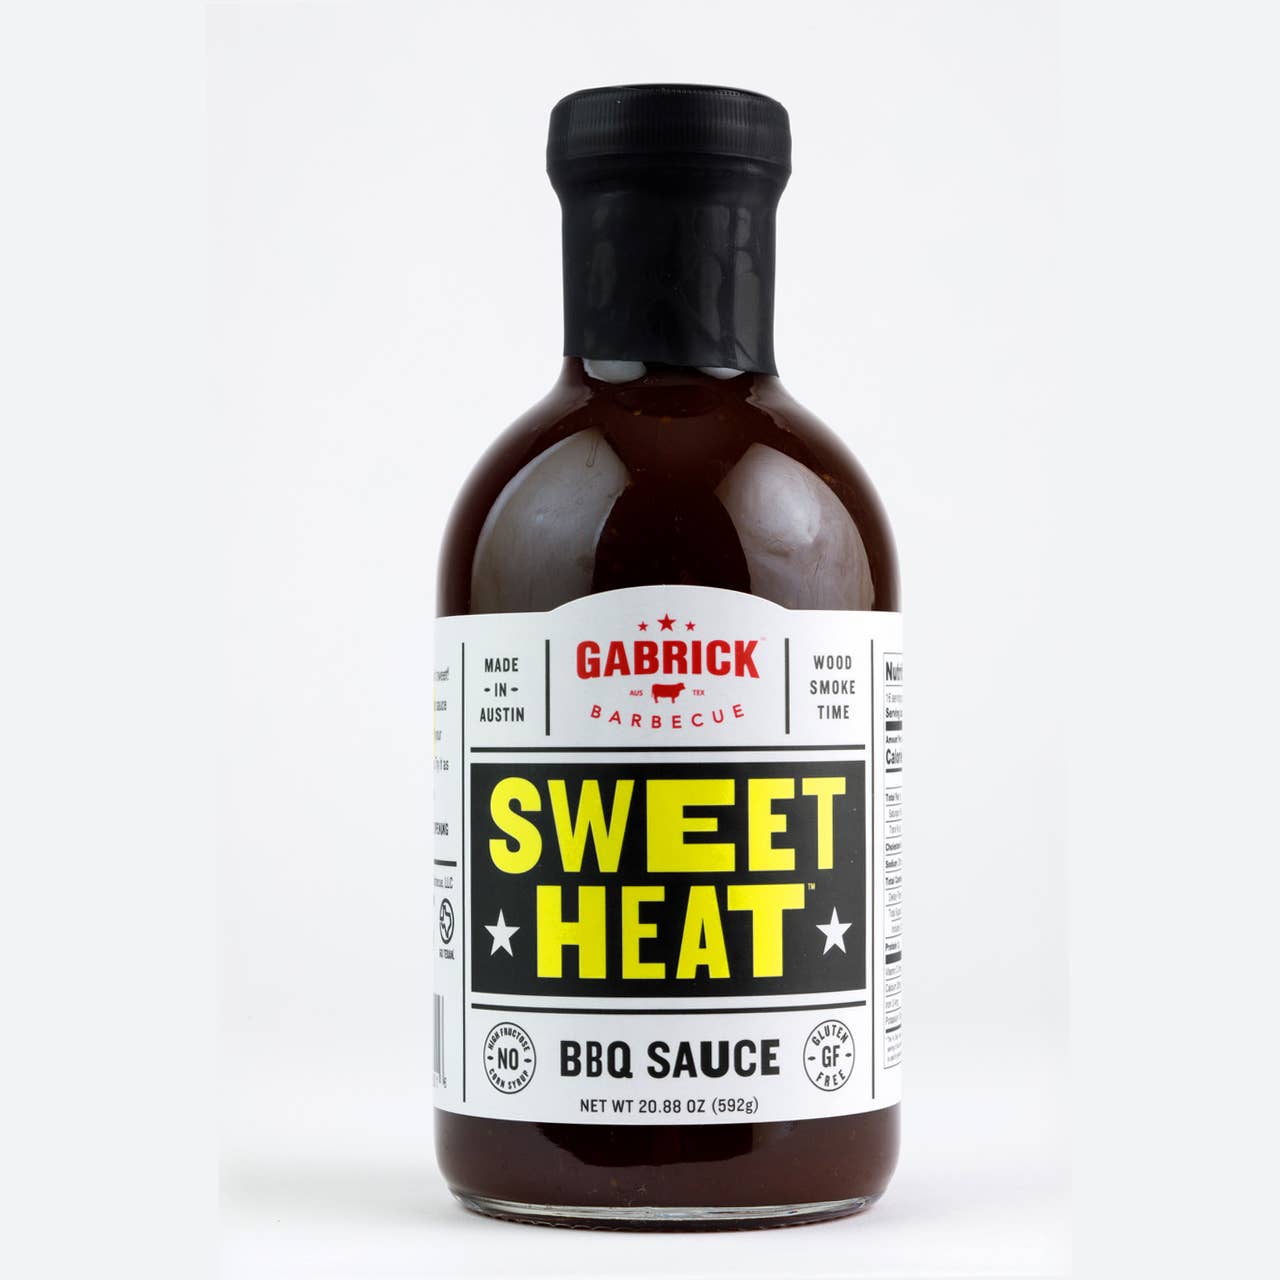 Off the Hook Barbeque Sauce Review :: The Meatwave